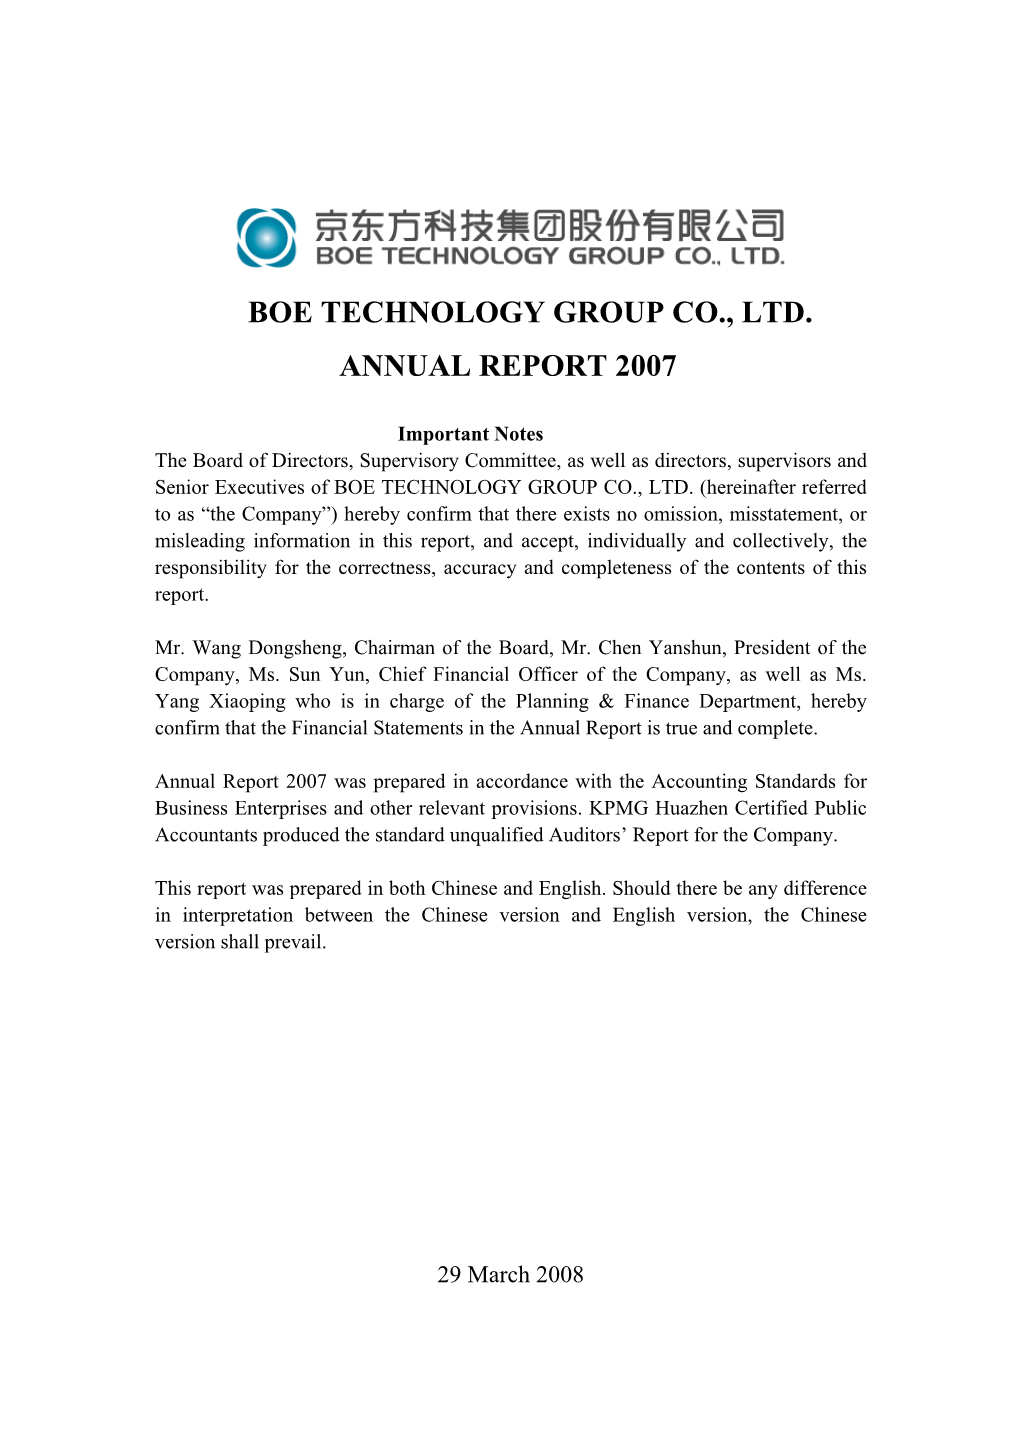 Boe Technology Group Co., Ltd. Annual Report 2007